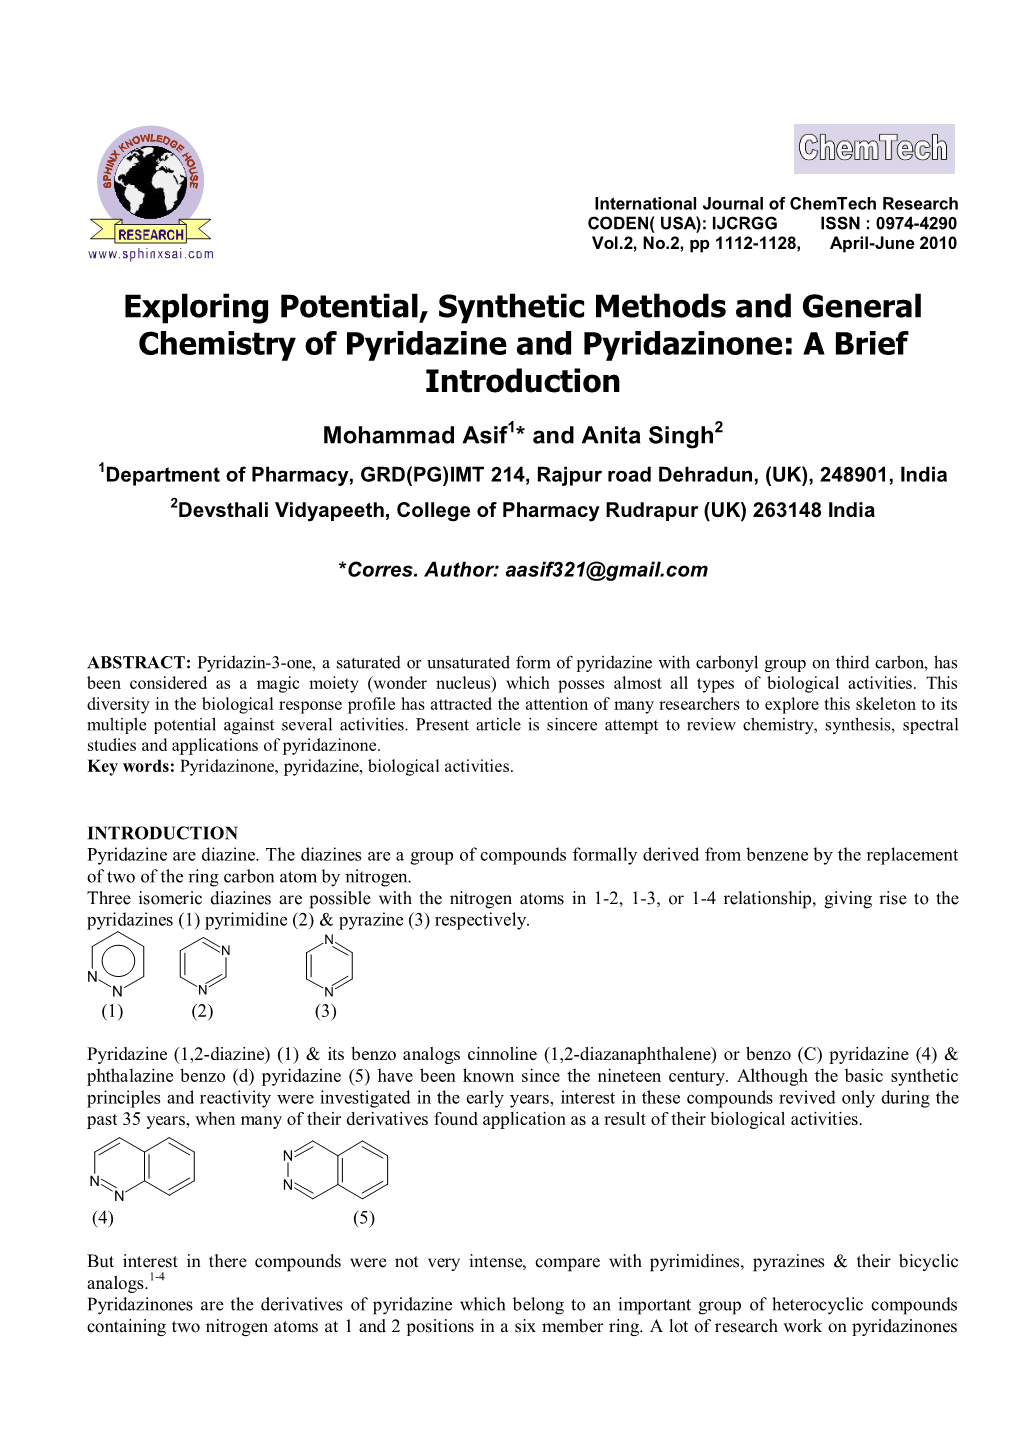 Exploring Potential, Synthetic Methods and General Chemistry of Pyridazine and Pyridazinone: a Brief Introduction